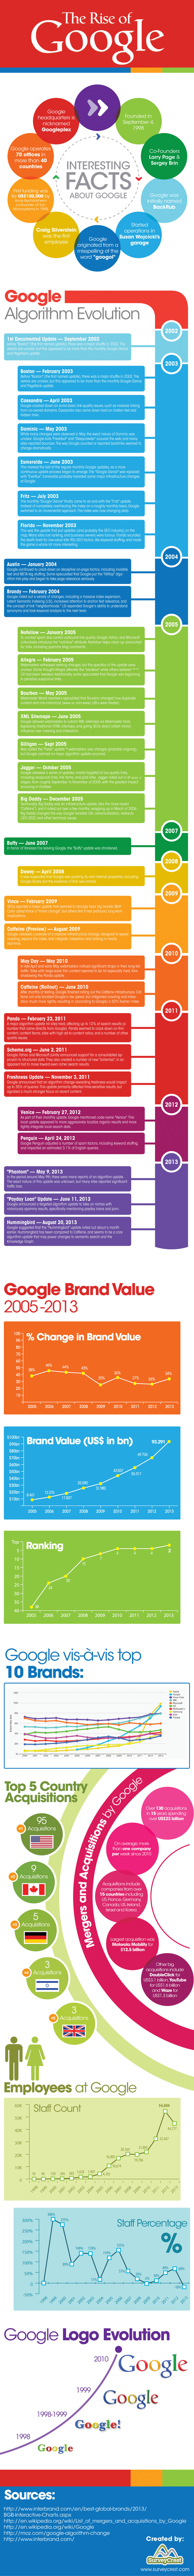 infographie-rise-of-google infographie